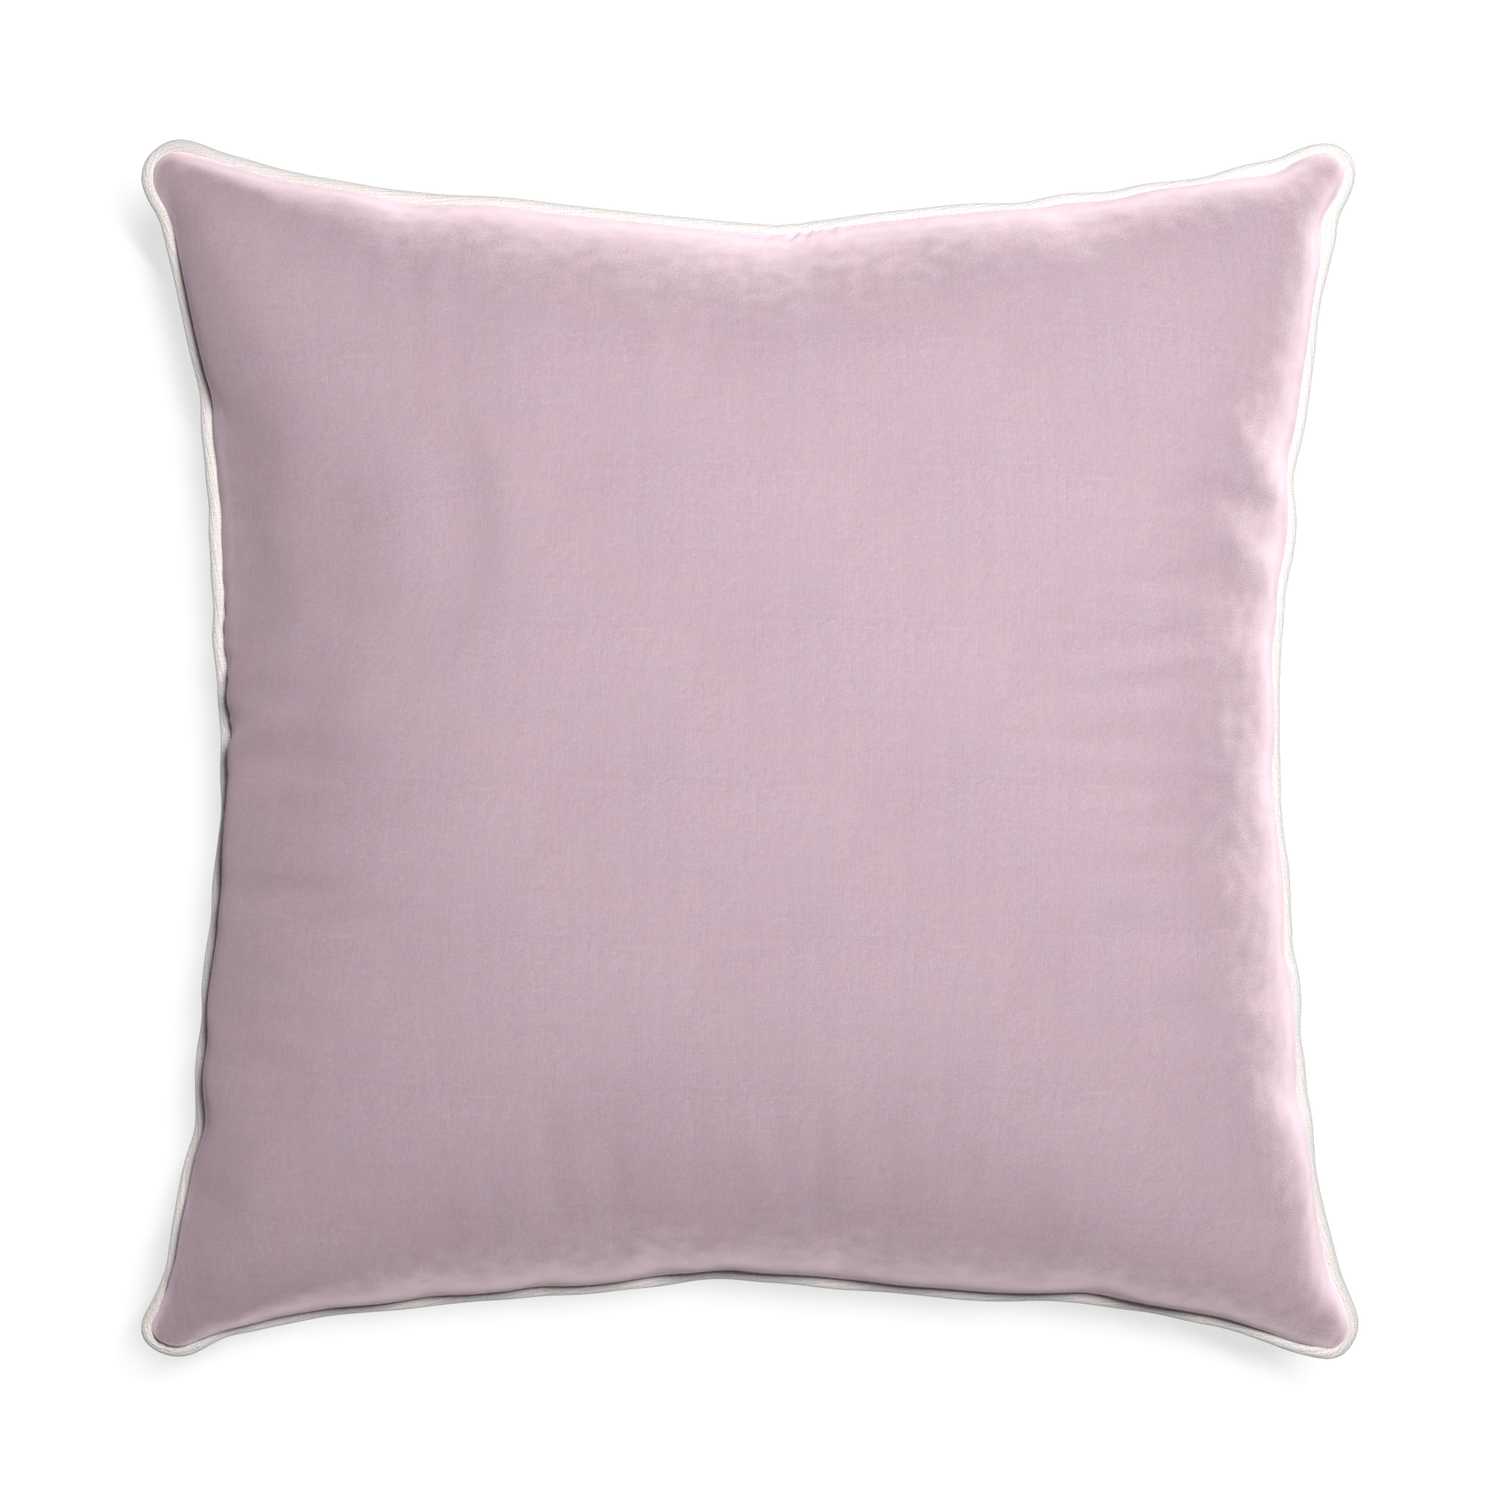 Euro-sham lilac velvet custom pillow with snow piping on white background